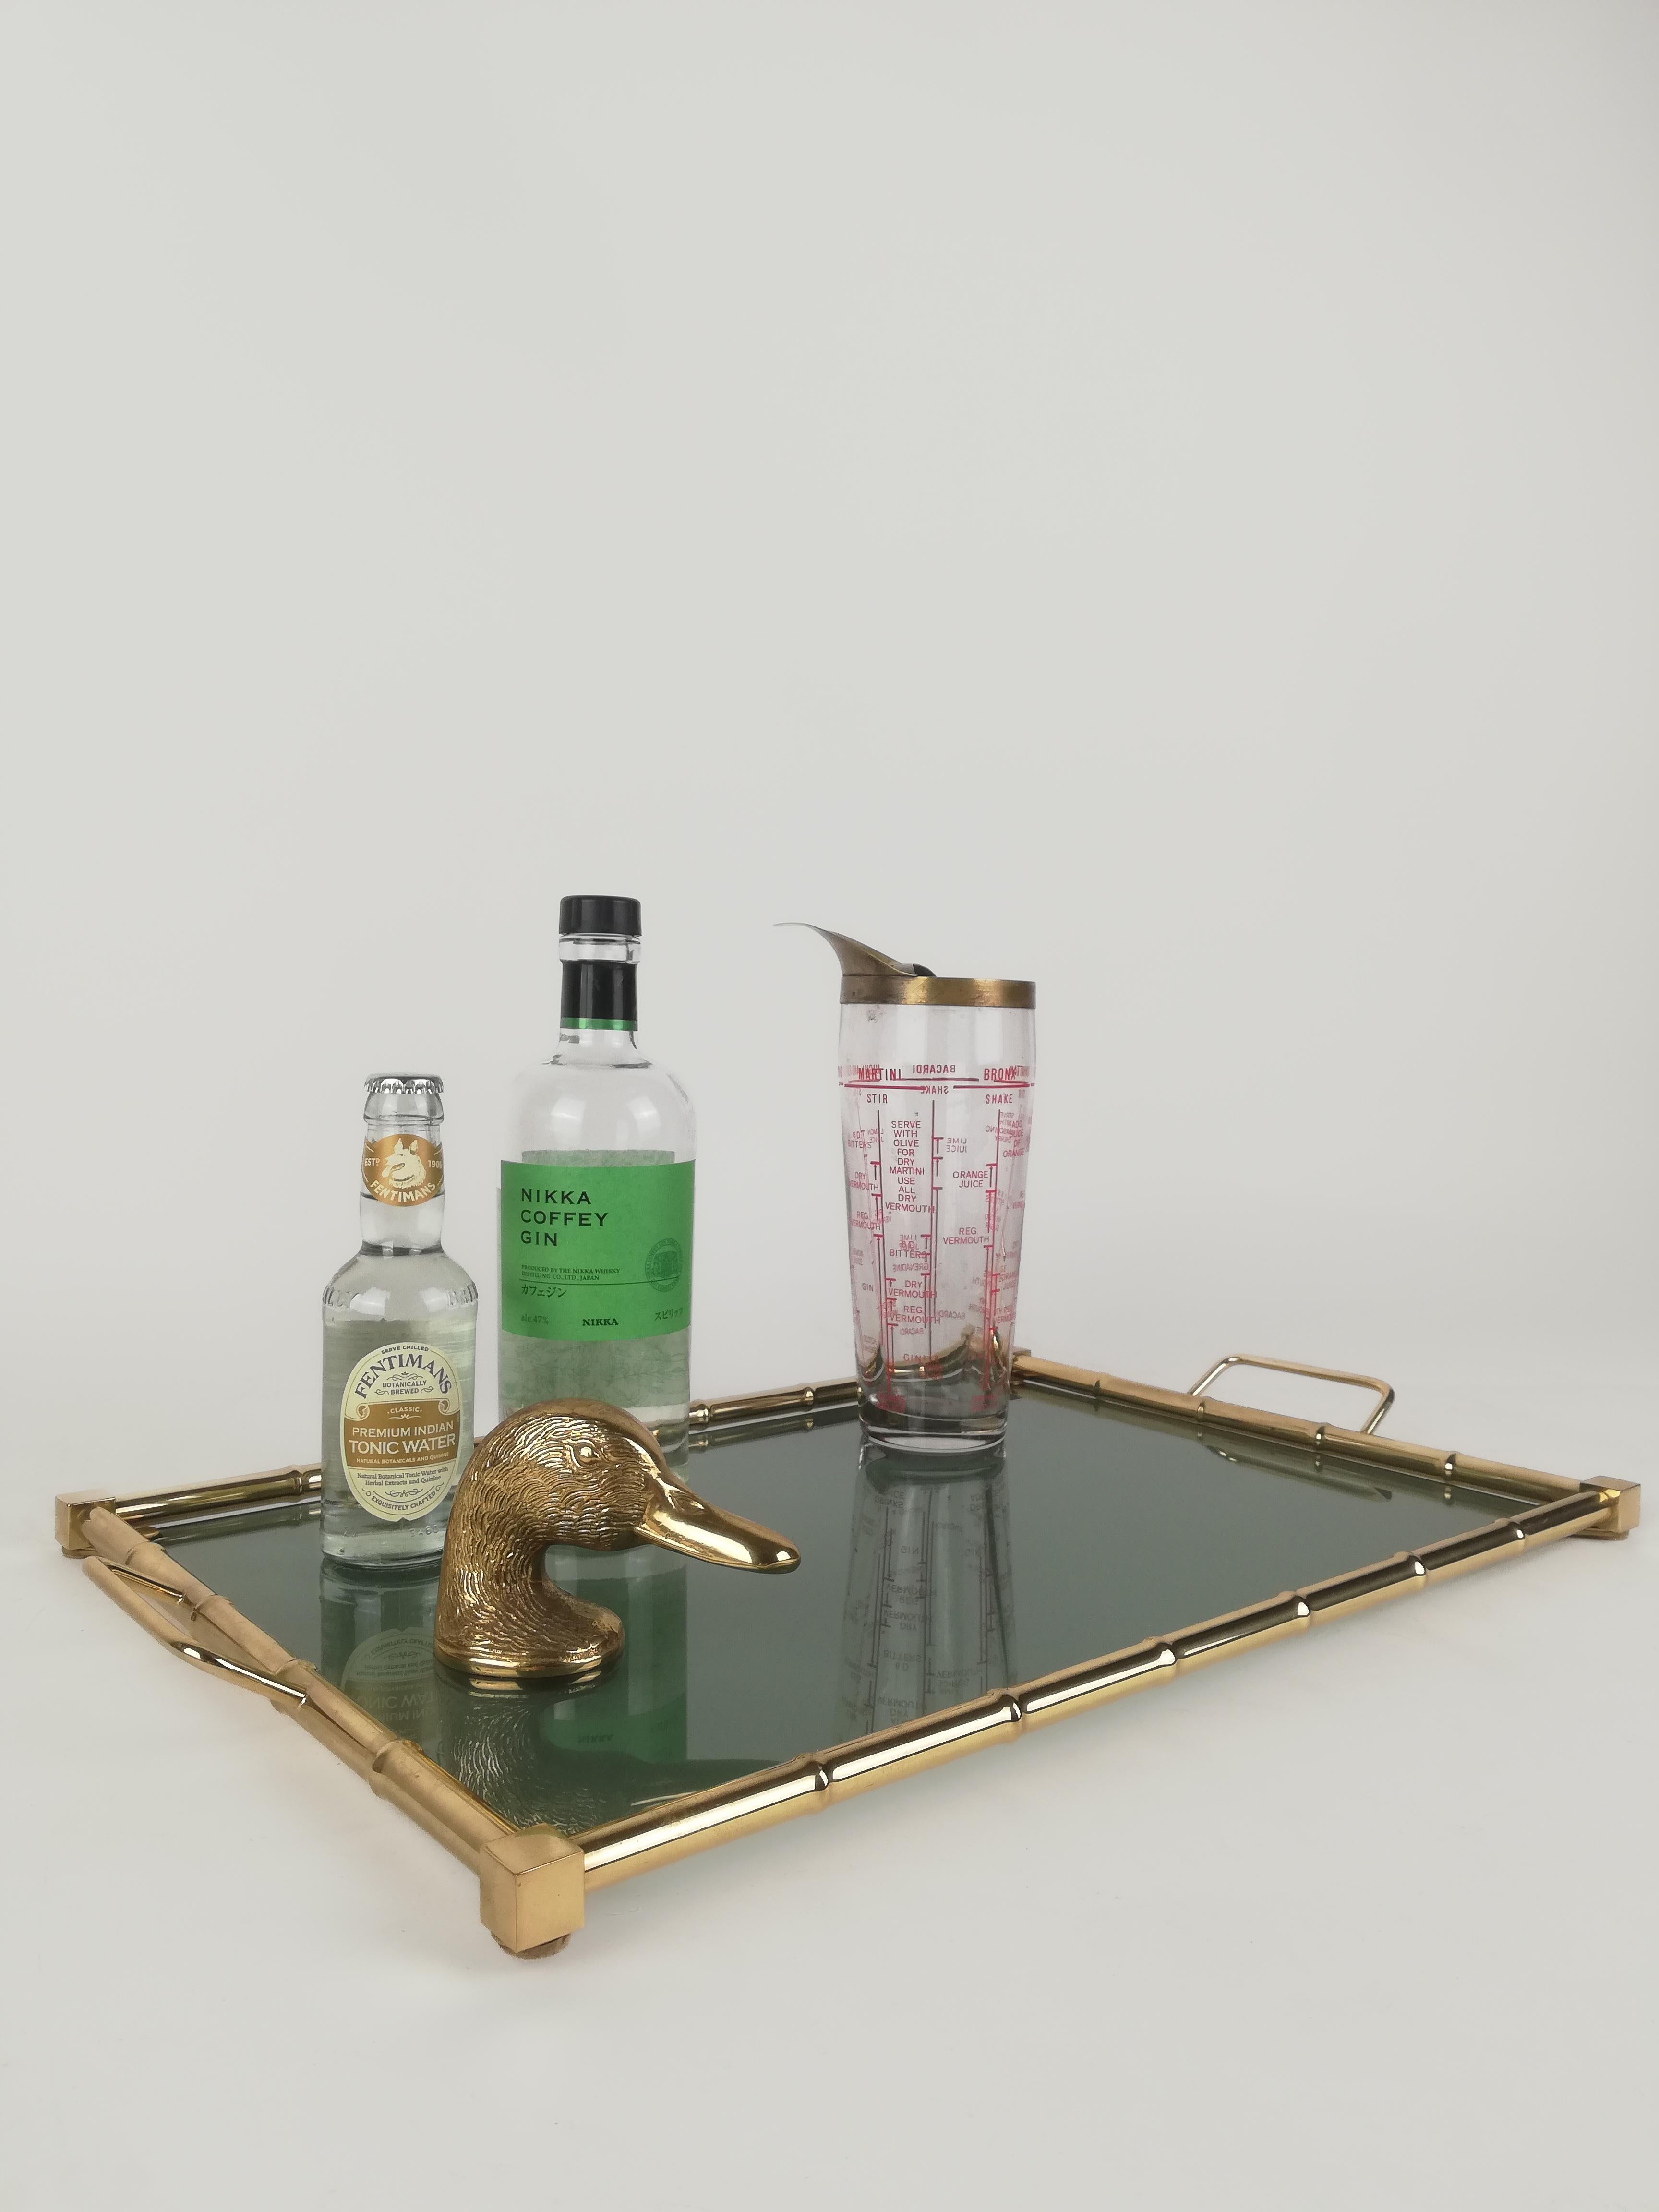 A splendid midcentury golden serving tray, in brass faux bamboo and fumè glass.
This vintage tray is made in Italy, and datable between the 1960s and the 1970s; a functional serving pieces and a perfect glamorous accessory for a Hollywood Regency